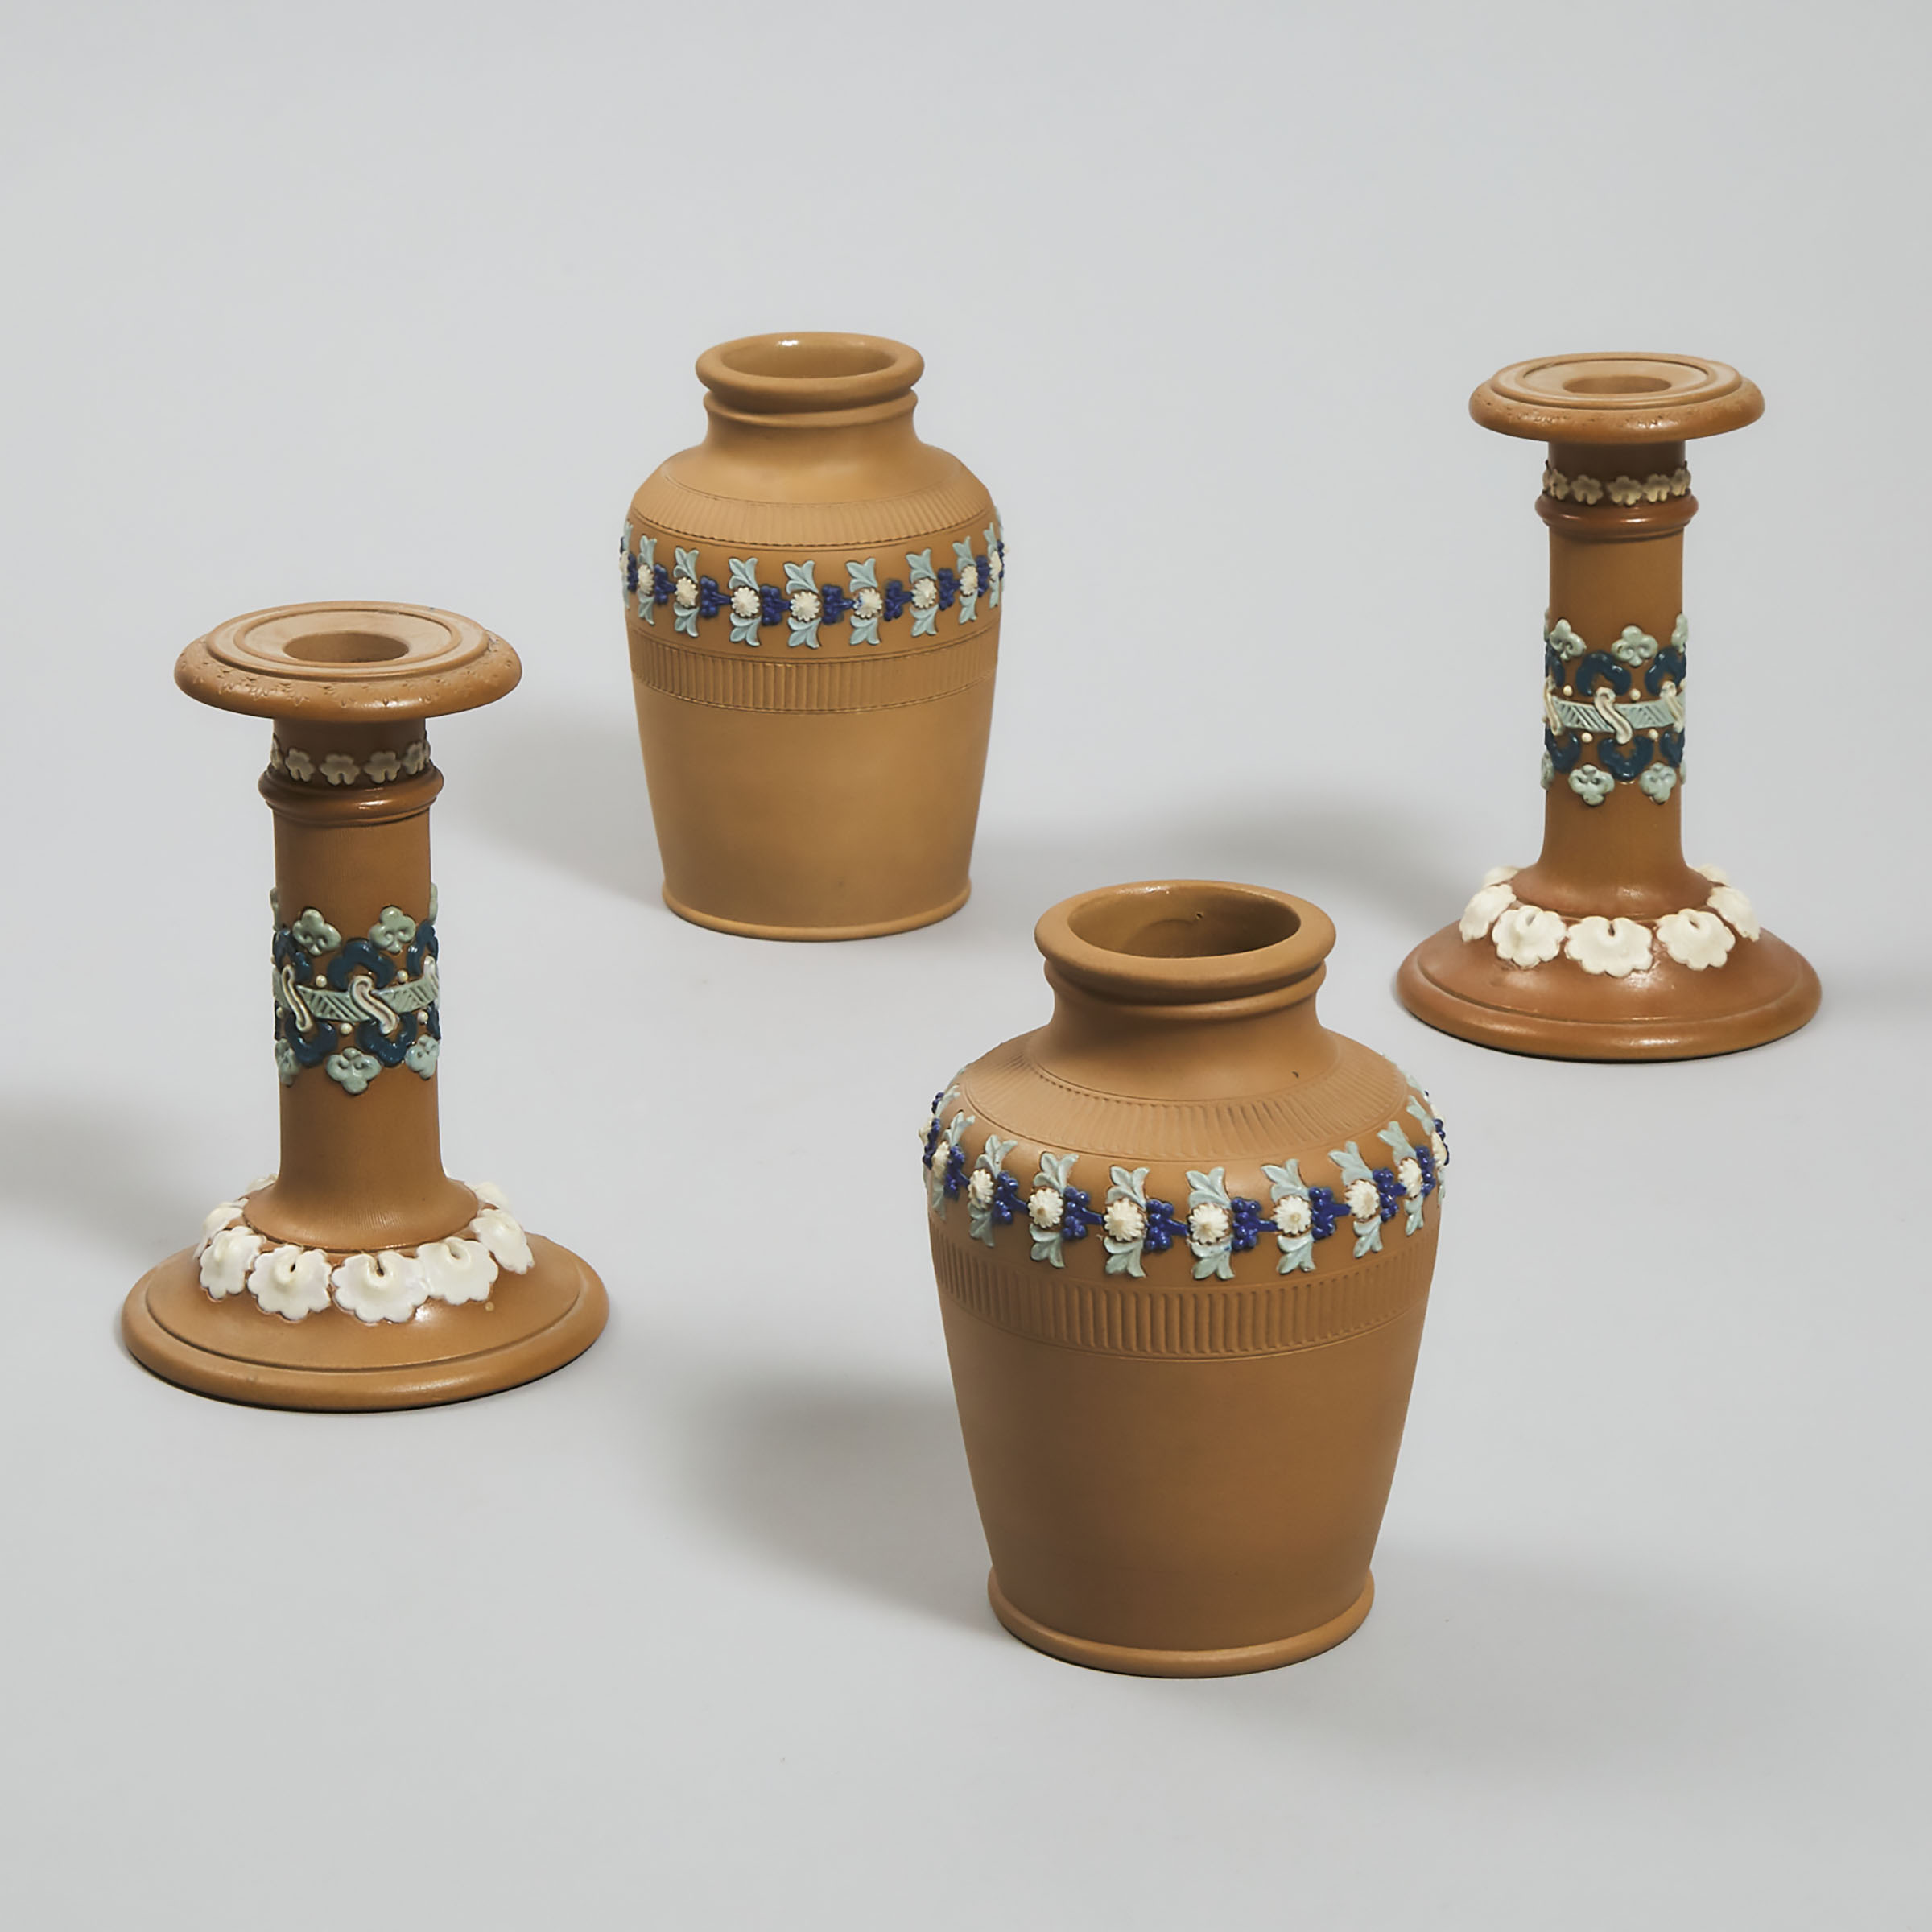 Pair of Doulton Lambeth Silicon Candlesticks and a Pair of Vases, late 19th century